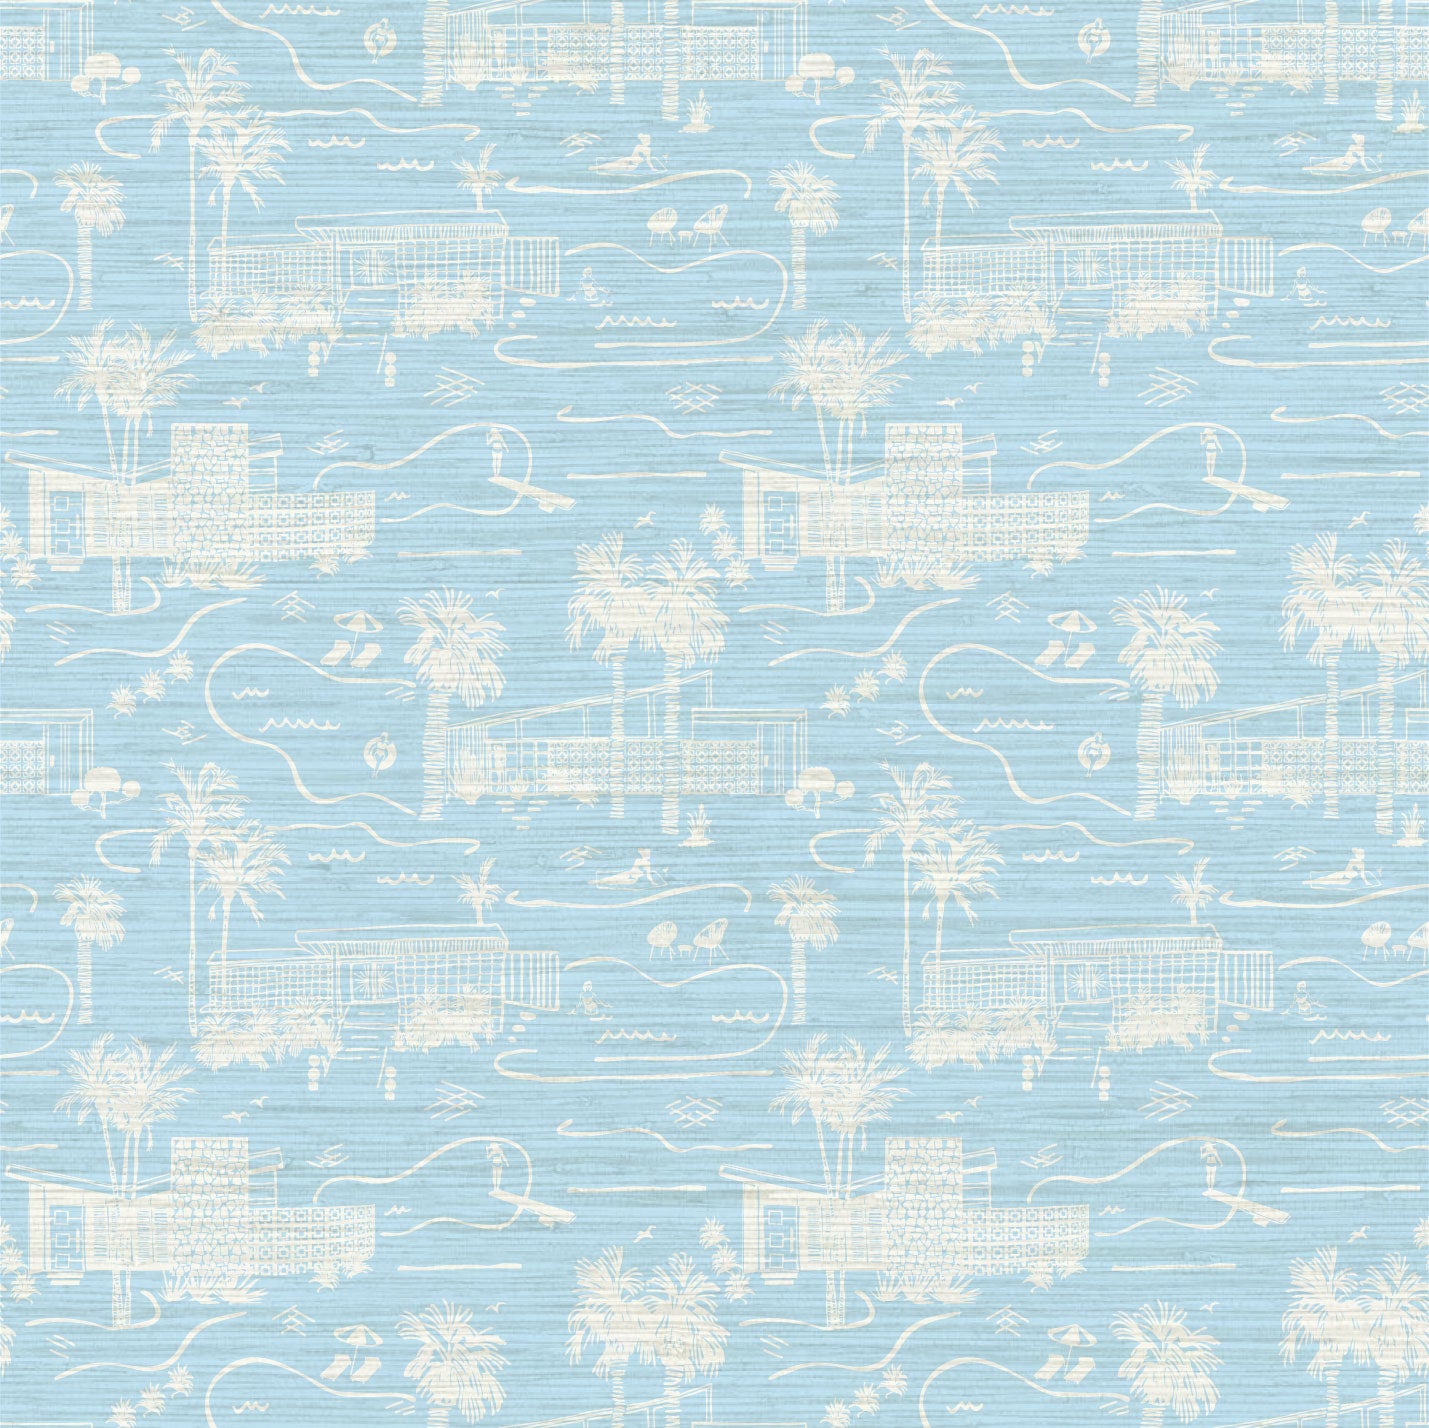 Load image into Gallery viewer, grasscloth toile printed wallpaper with mid century modern houses inspired by palm springs featuring swimming pools, palm trees and secret suntanning ladies in this hand drawn one color printed design with French blue base and white print
